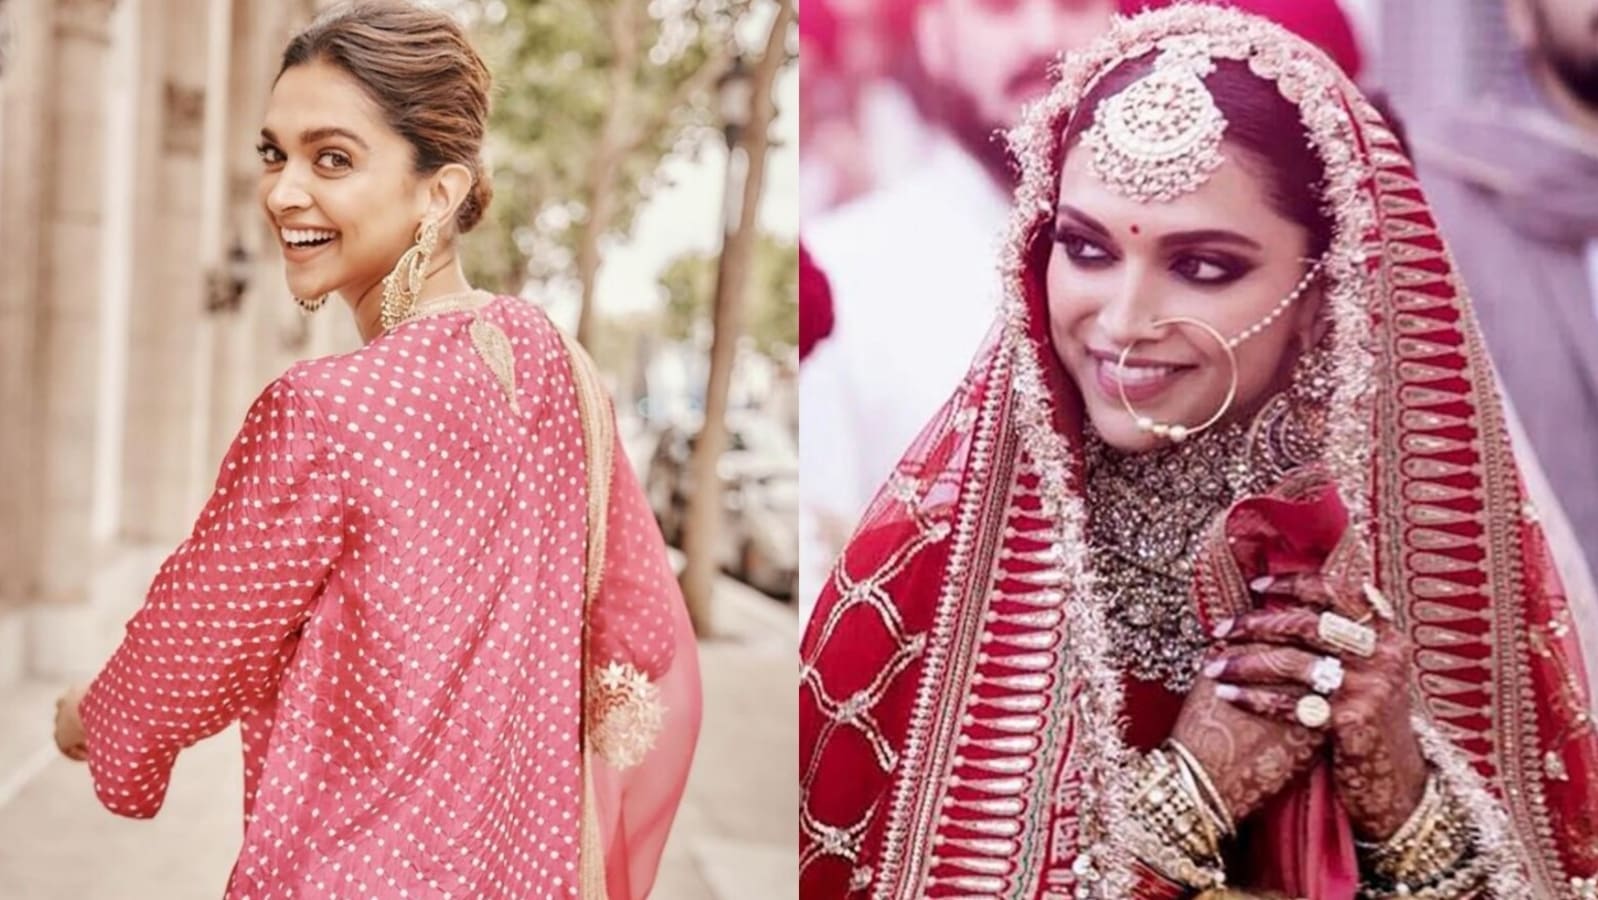 You are currently viewing Deepika Padukone says ‘I’m a married woman now’ after fan shouts ‘love you’